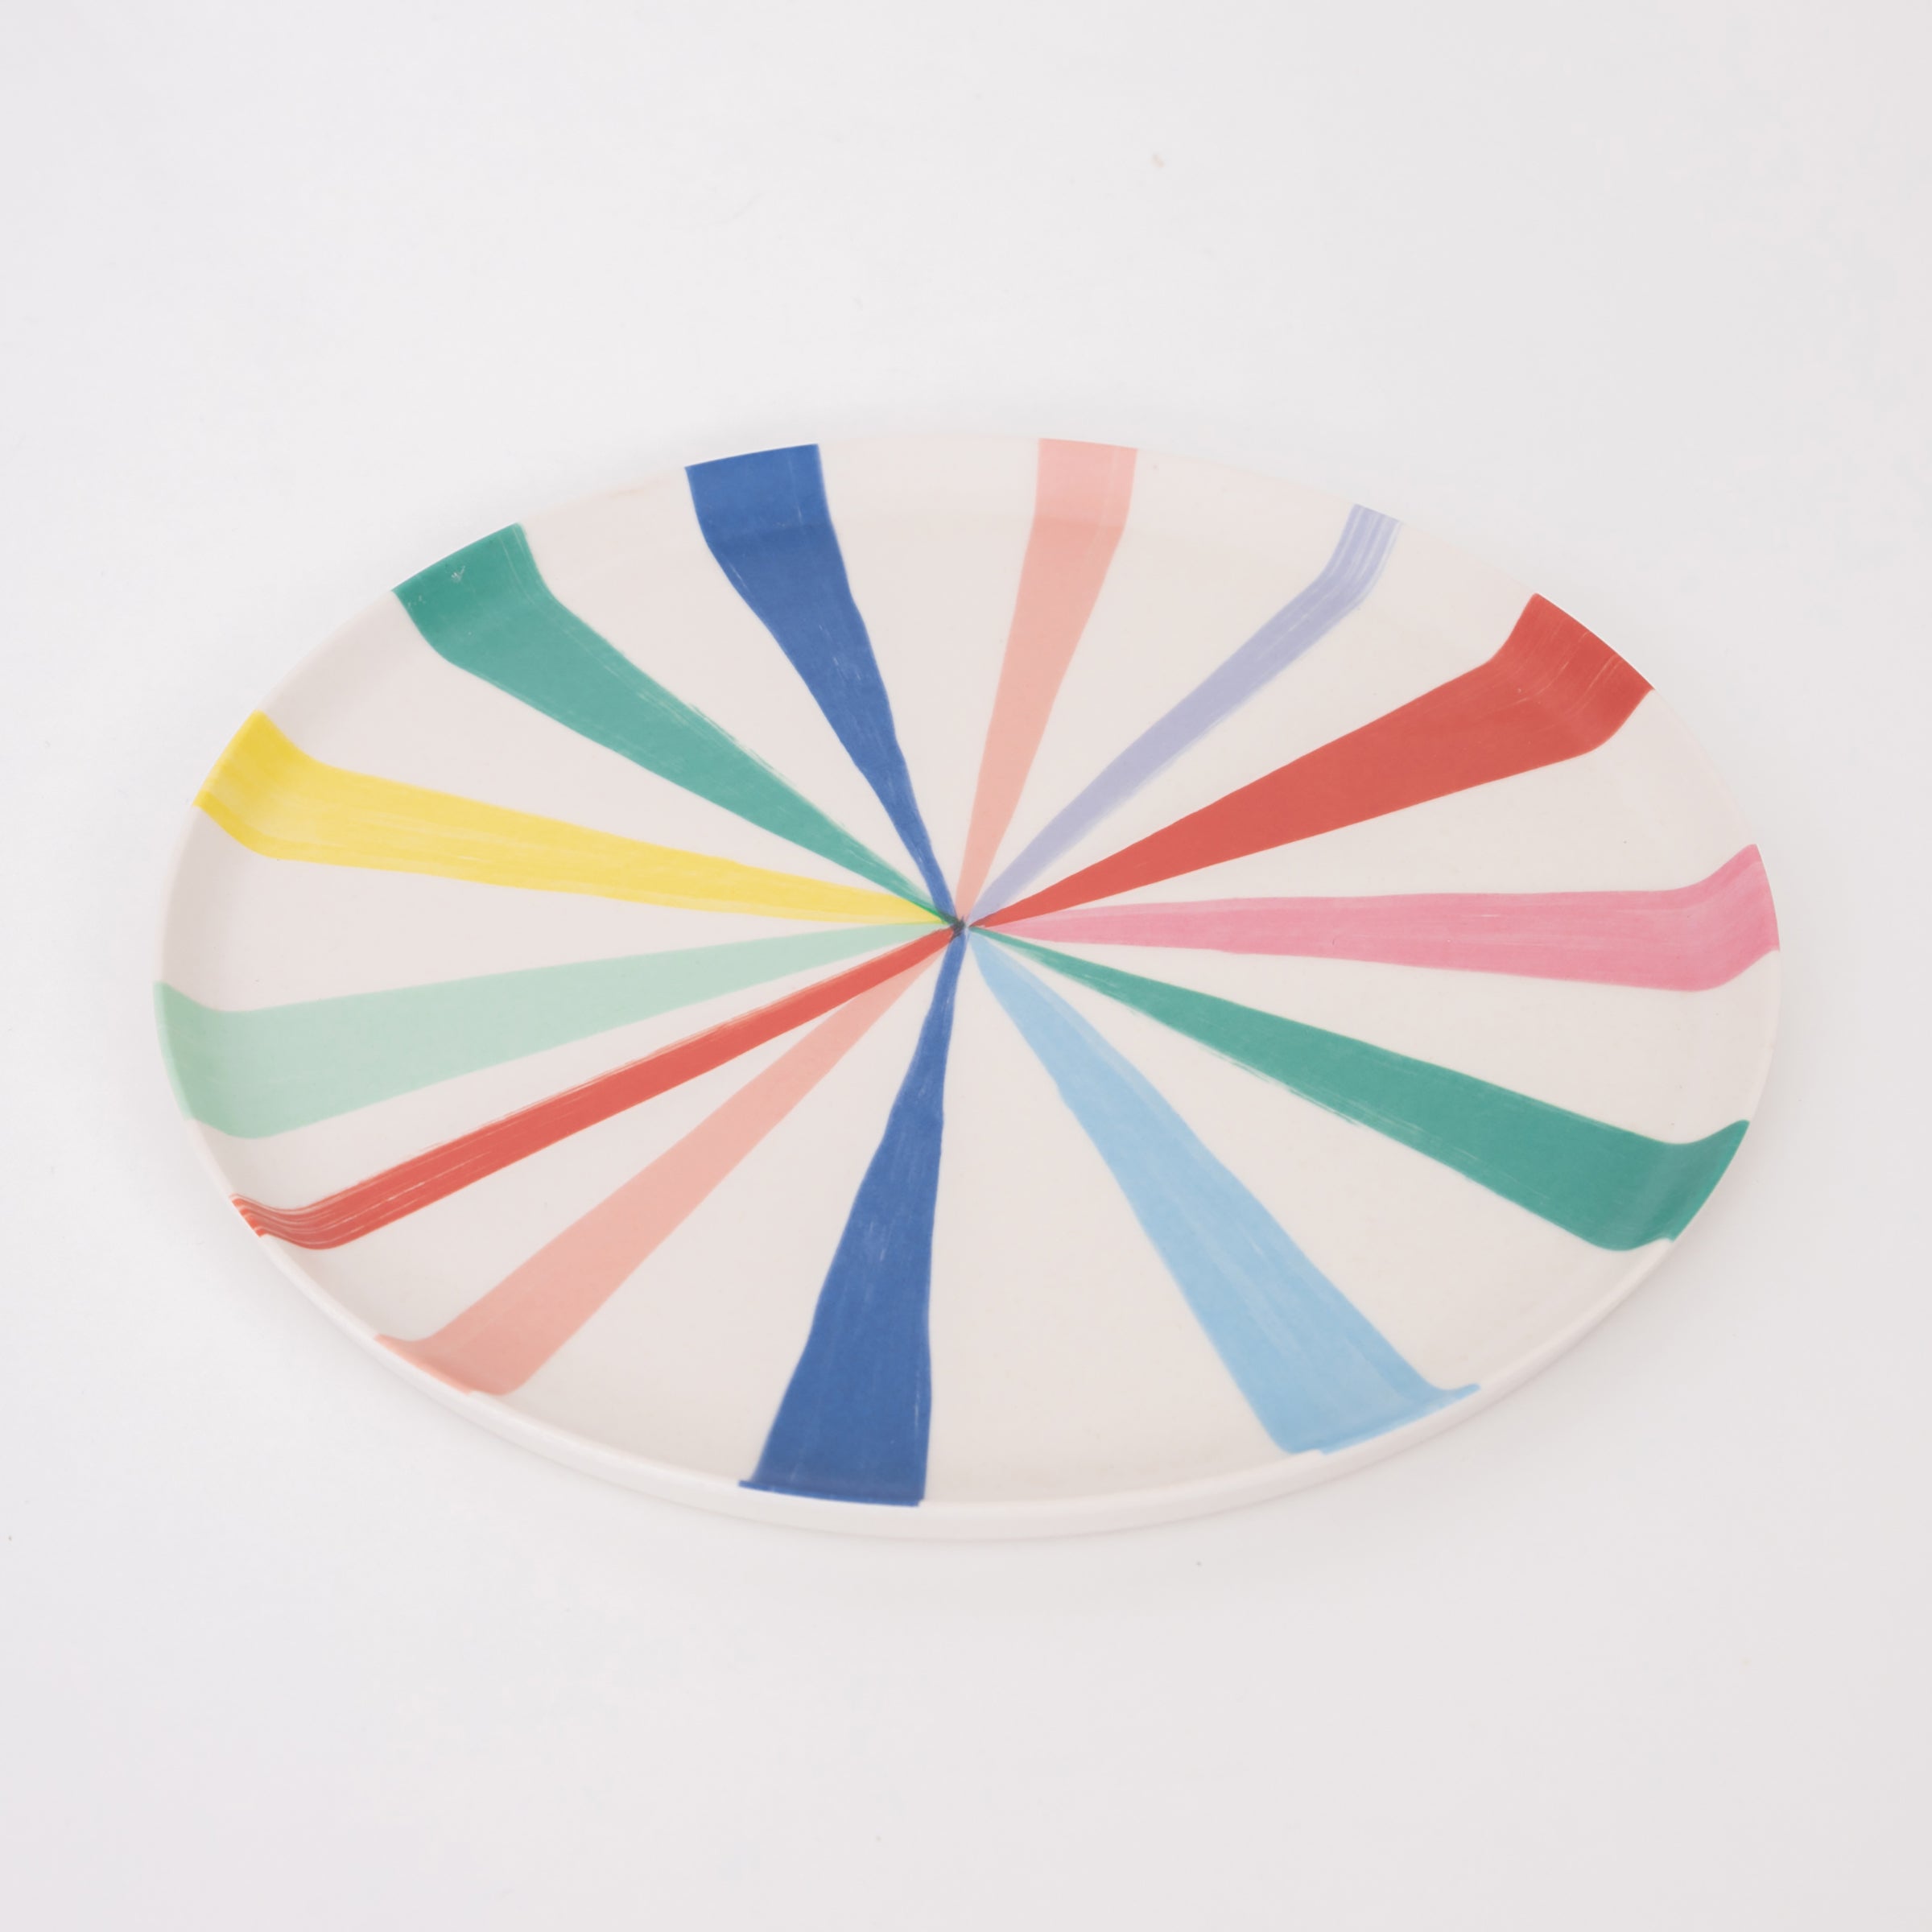 Our bamboo plates, designed to be reusable plates, feature bright colors making them ideal as large party plates for any party theme.